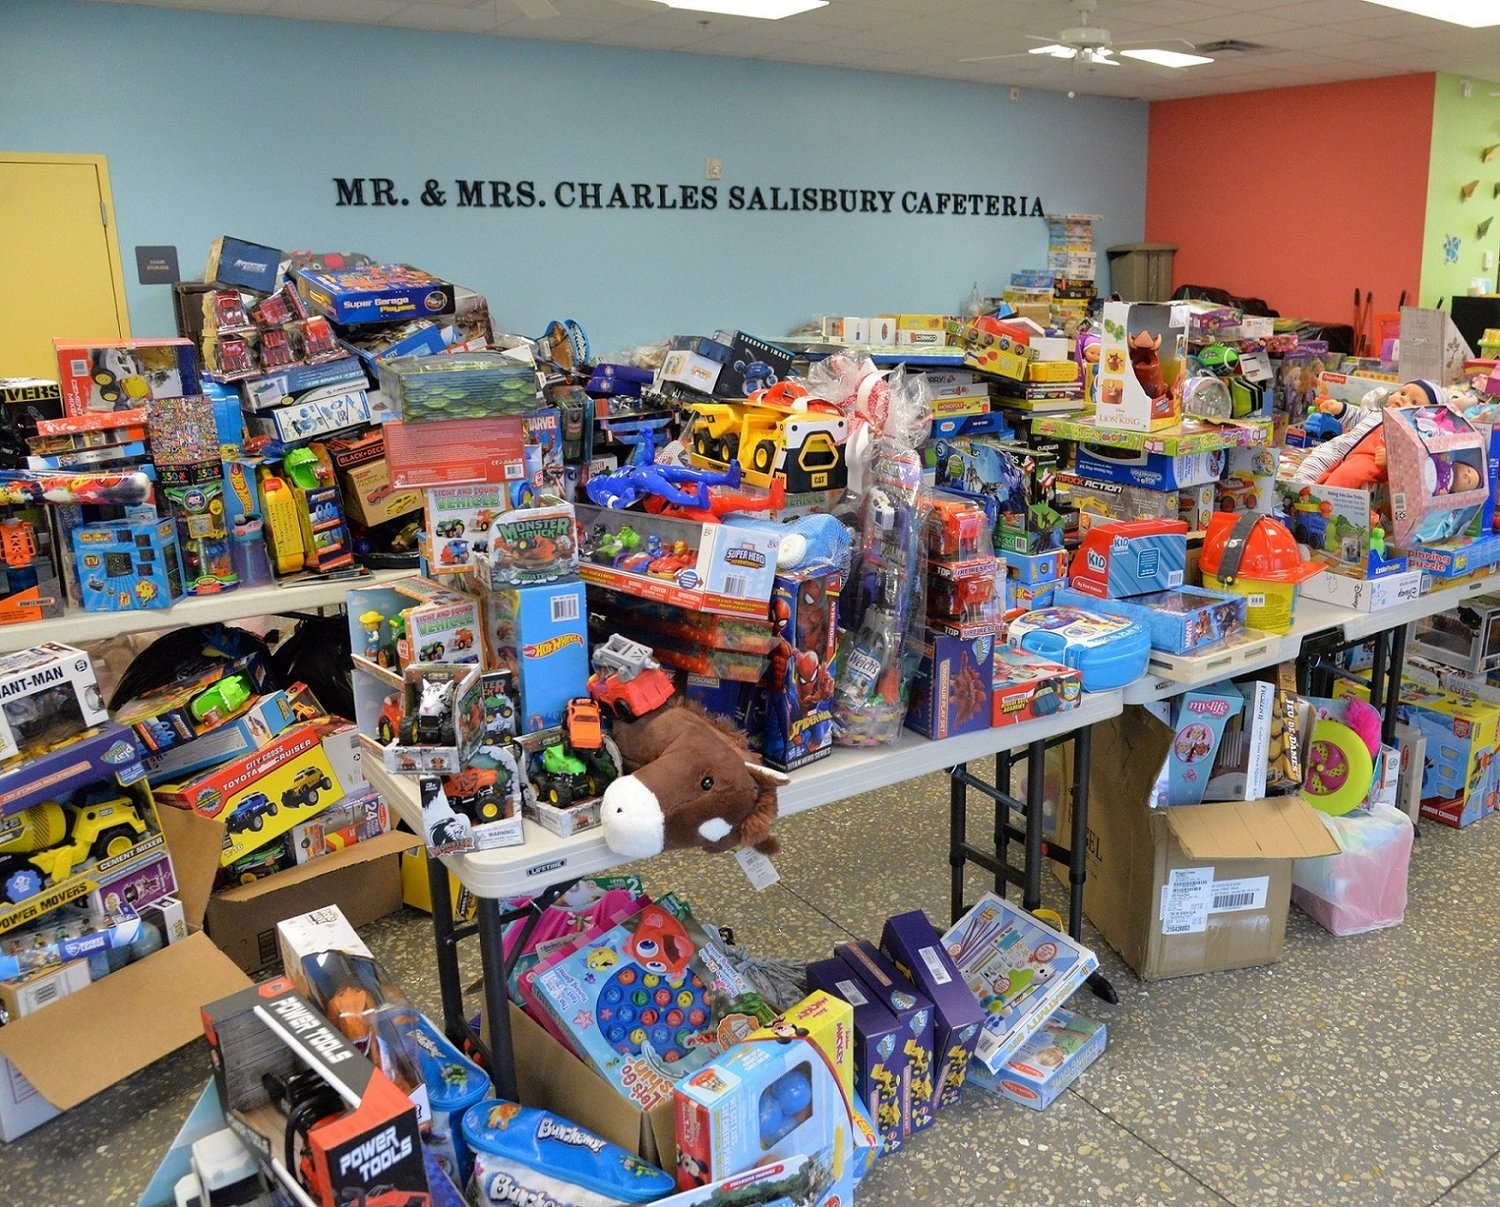 Guadalupe Center is requesting donations of children’s gifts to restock its Holiday Gift Shop.